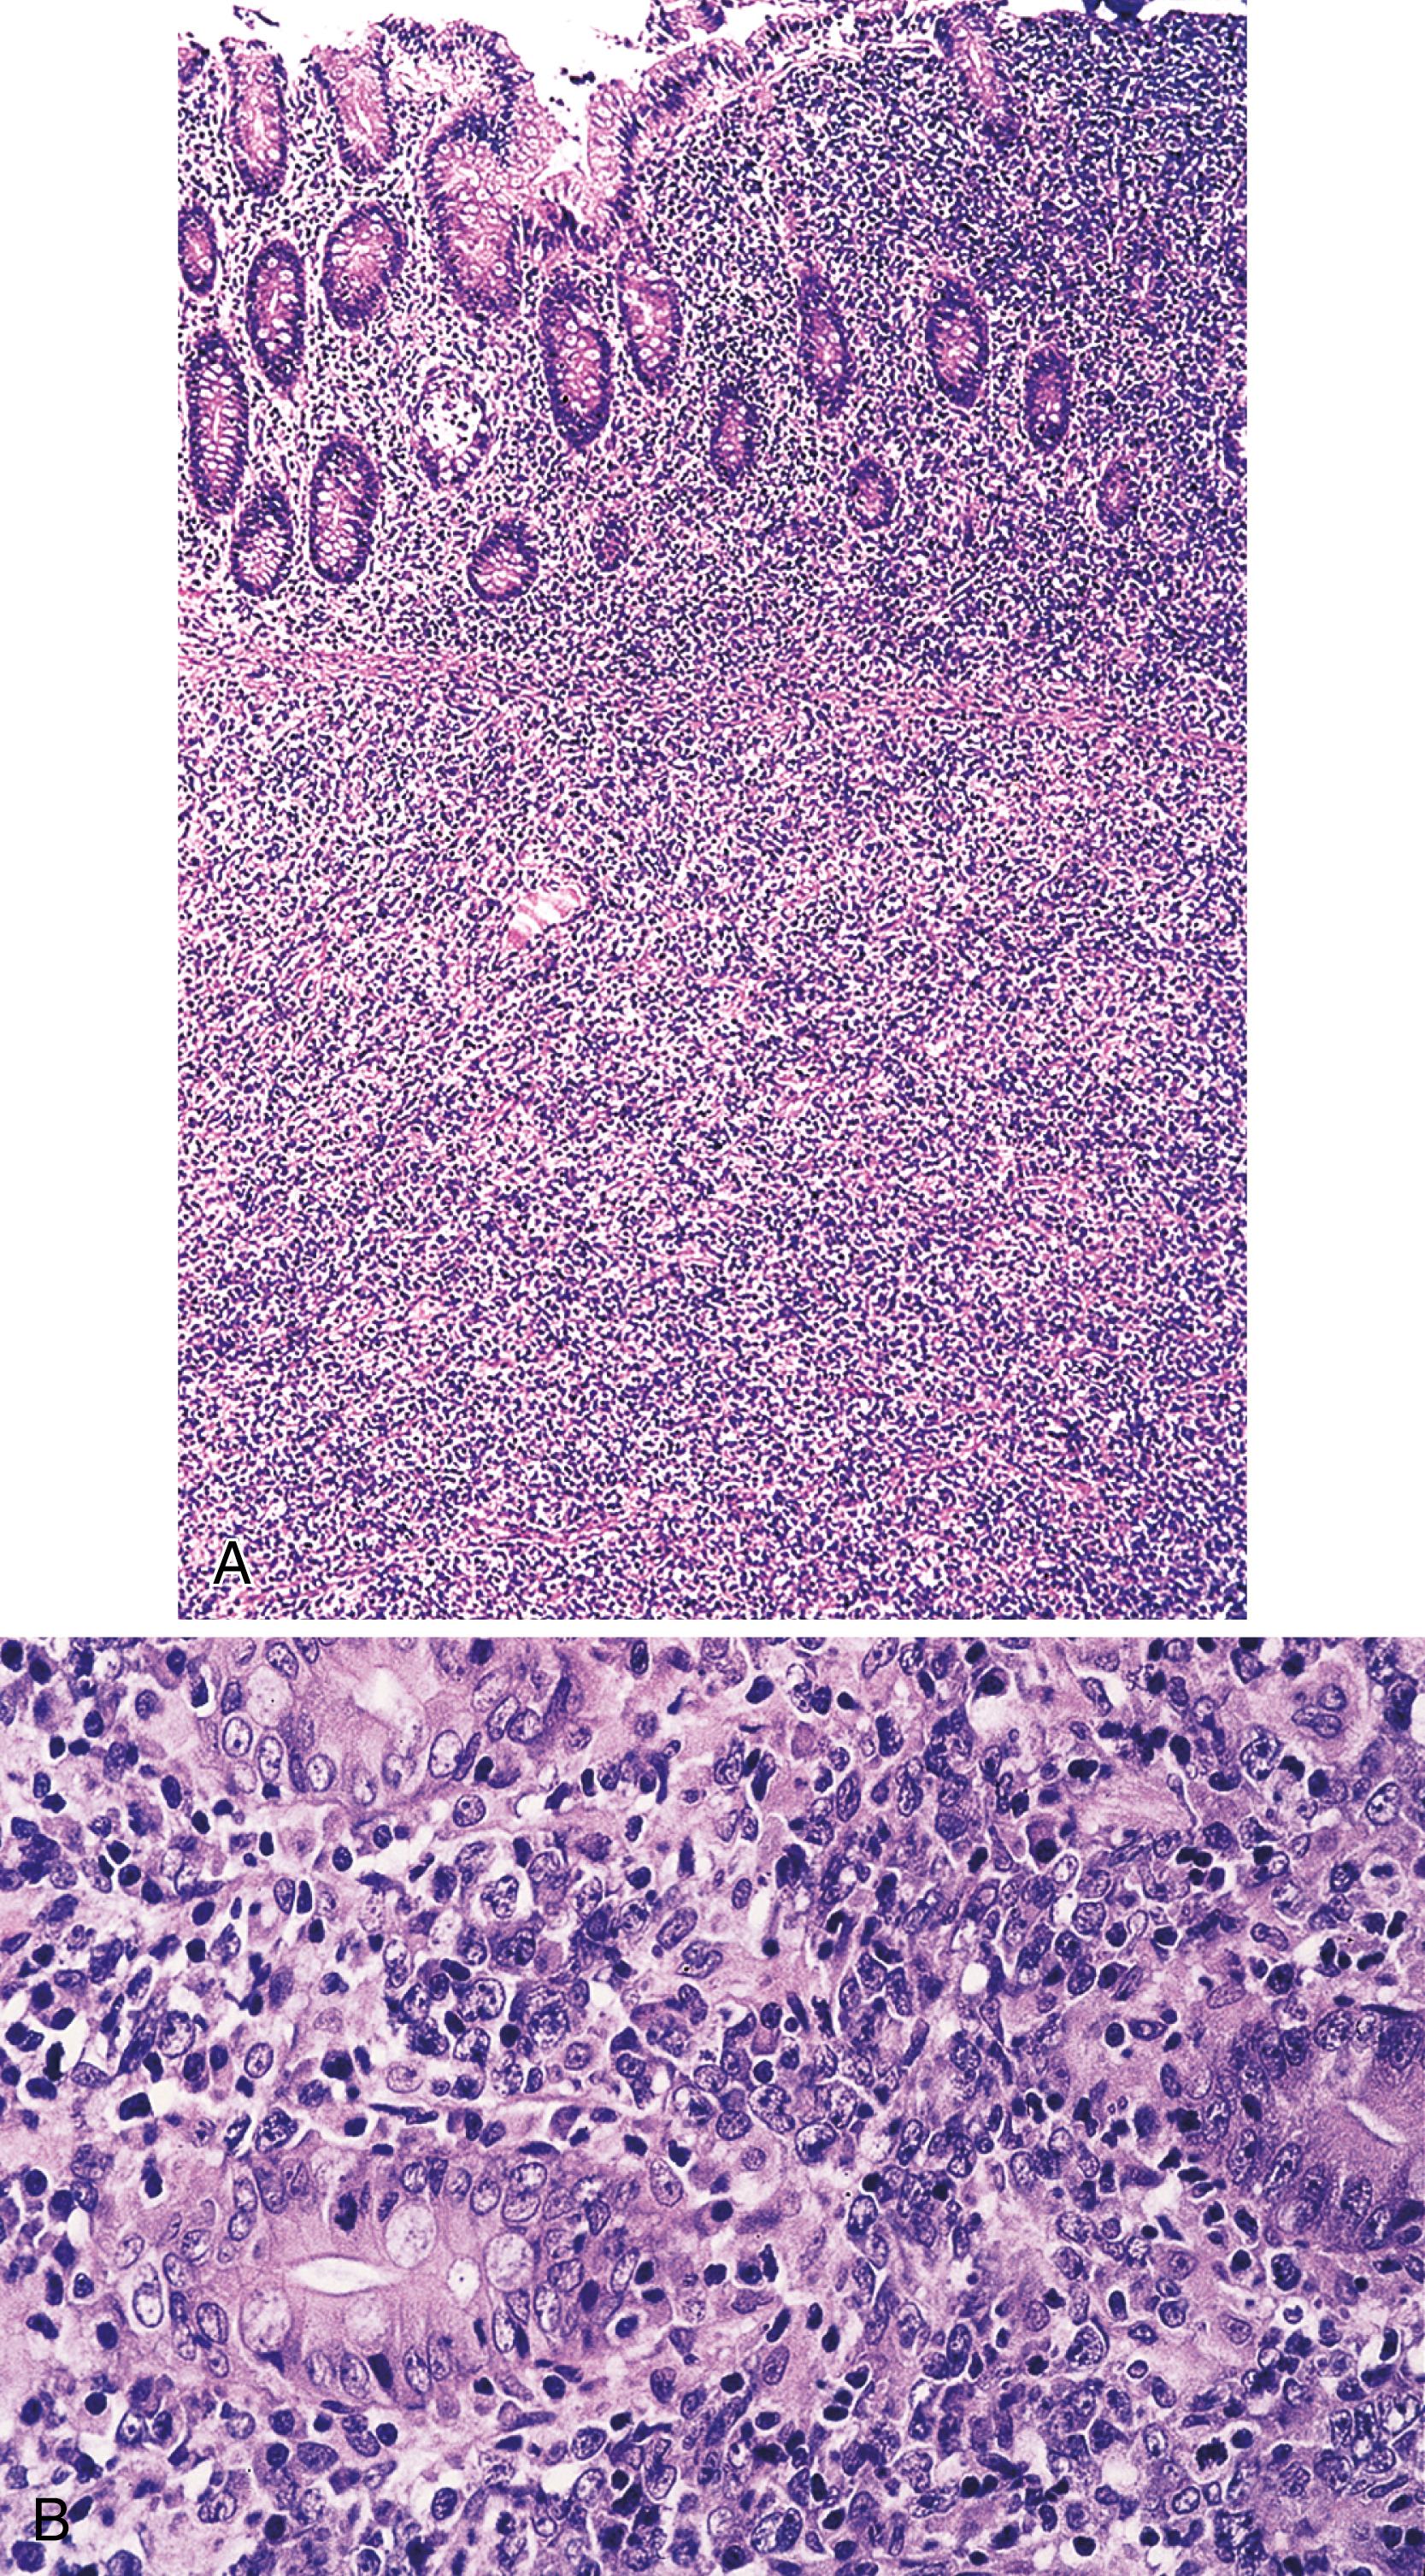 FIGURE 31.7, Diffuse large B-cell lymphoma, arising in the cecum of an HIV+ patient.